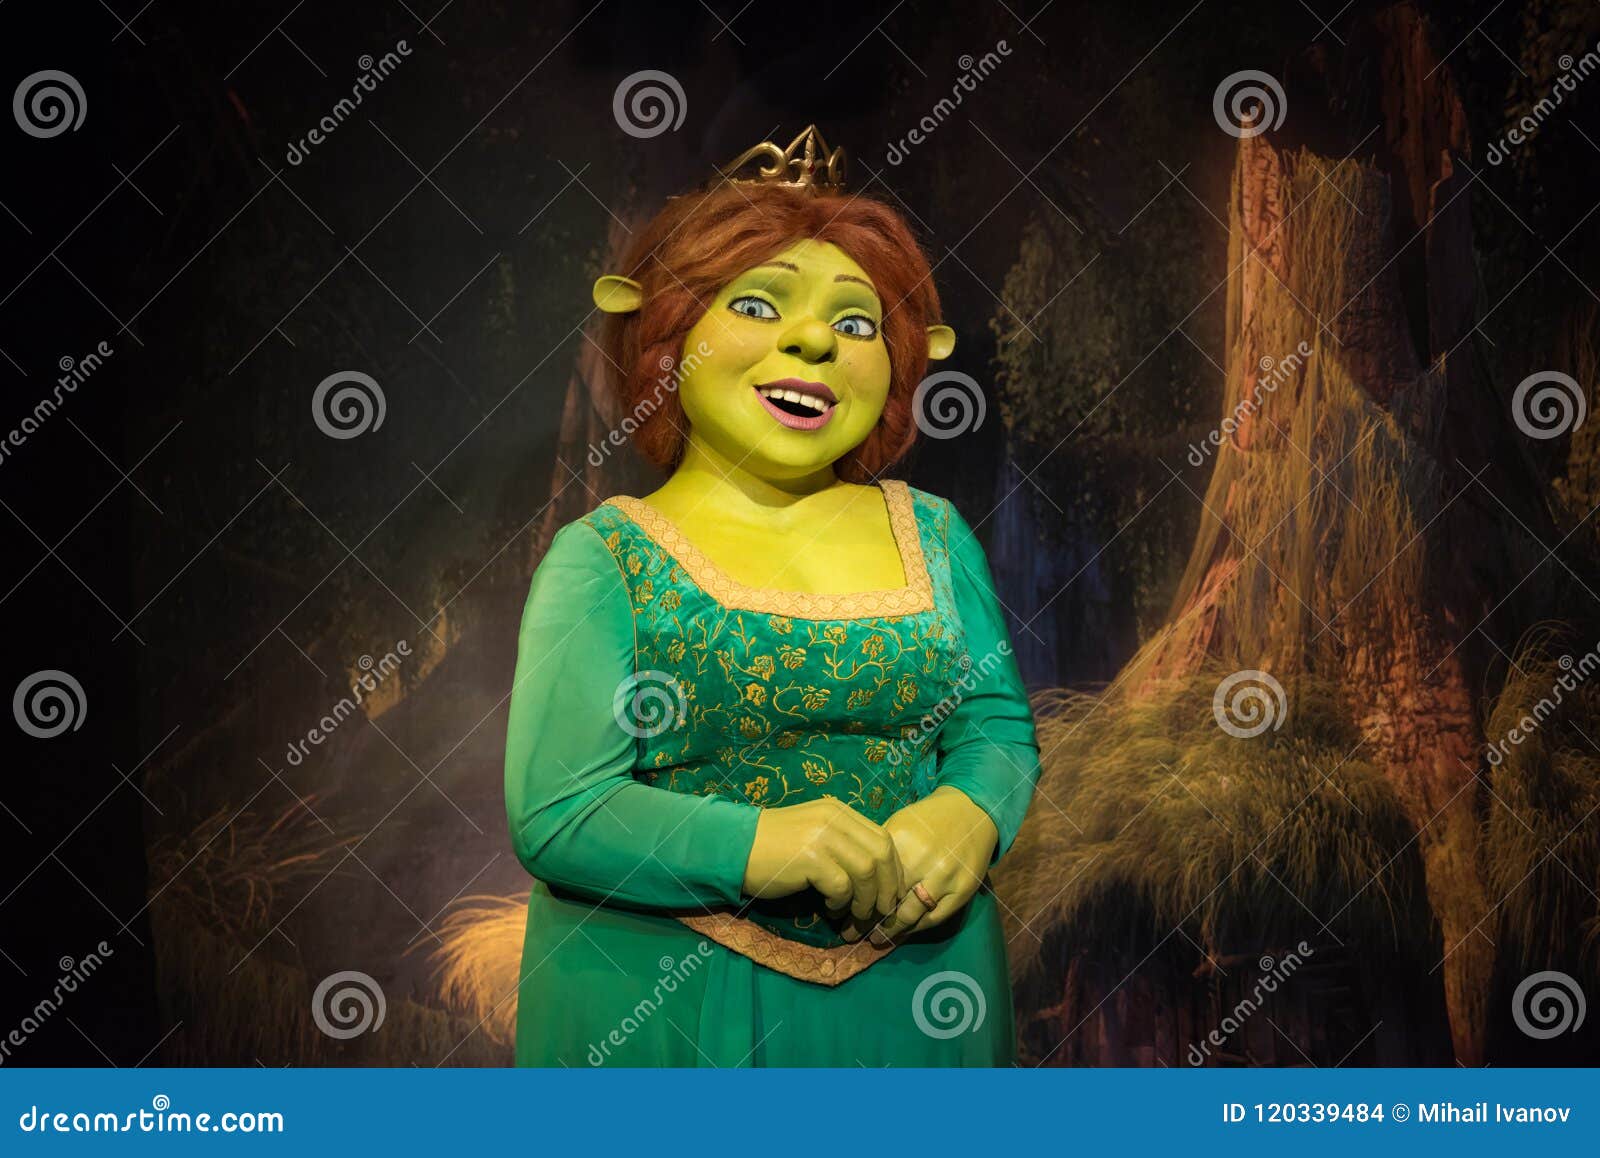 demos panayiotou recommends pictures of fiona from shrek pic